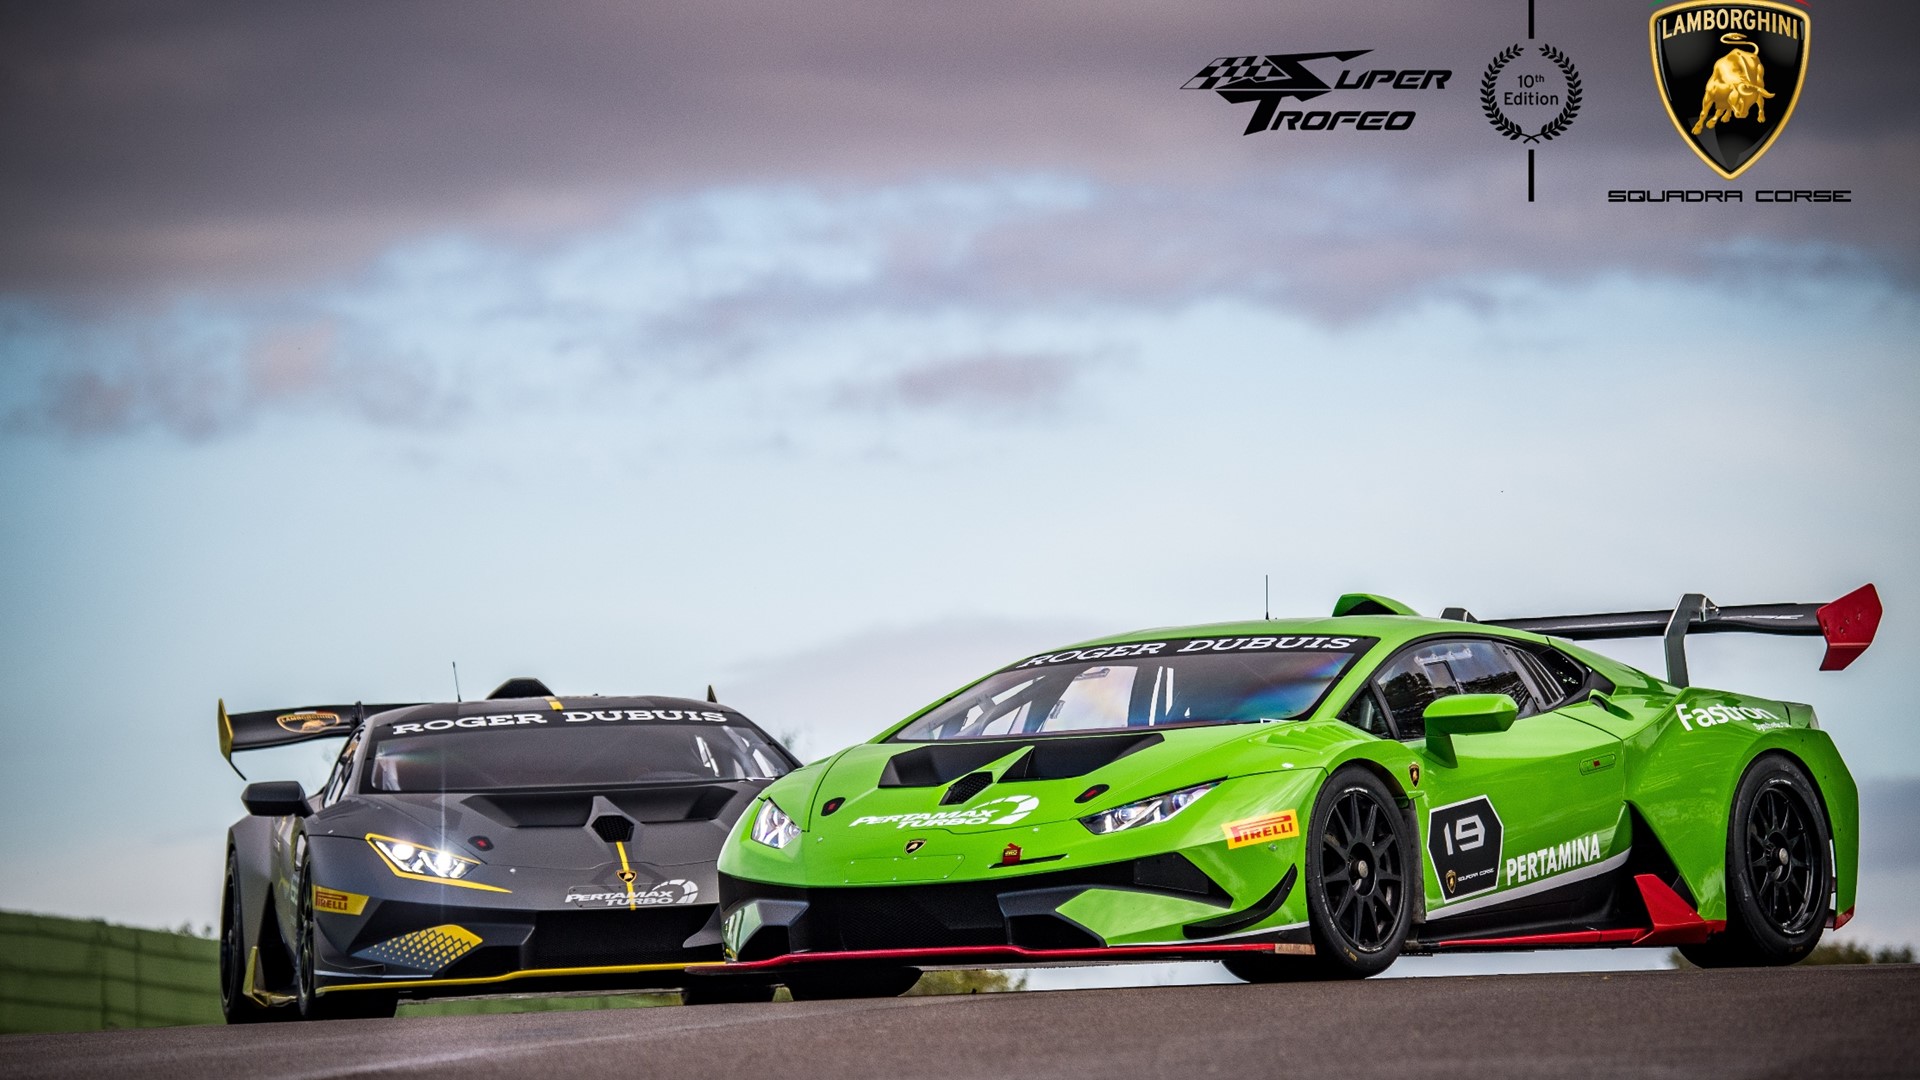 The Super Trofeo celebrates its tenth edition and the